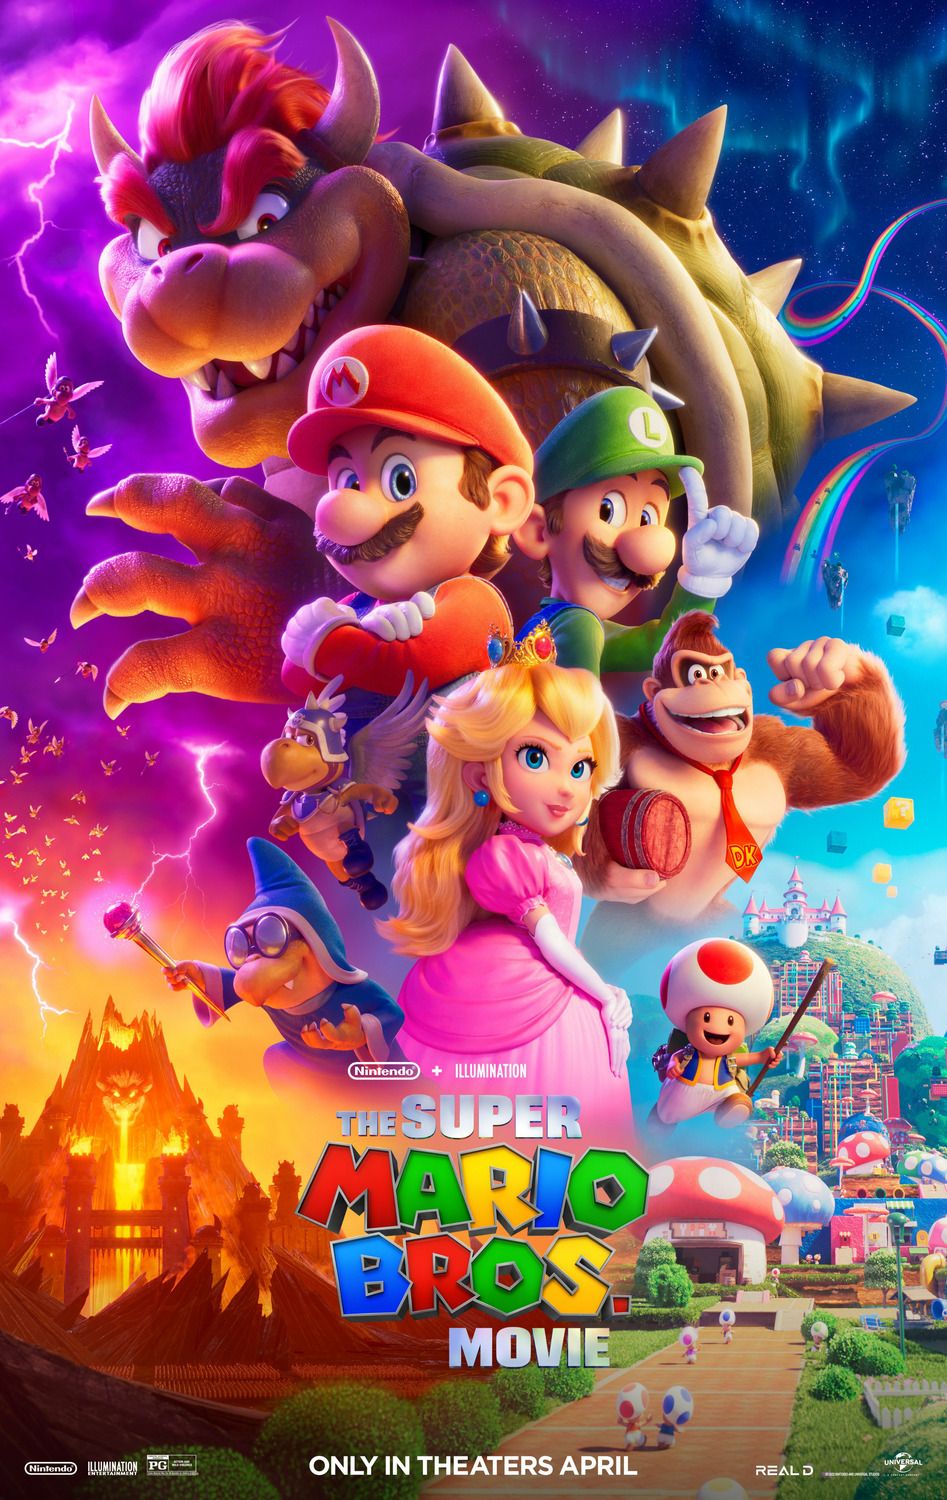 The poster for The Super Mario Brothers Movie